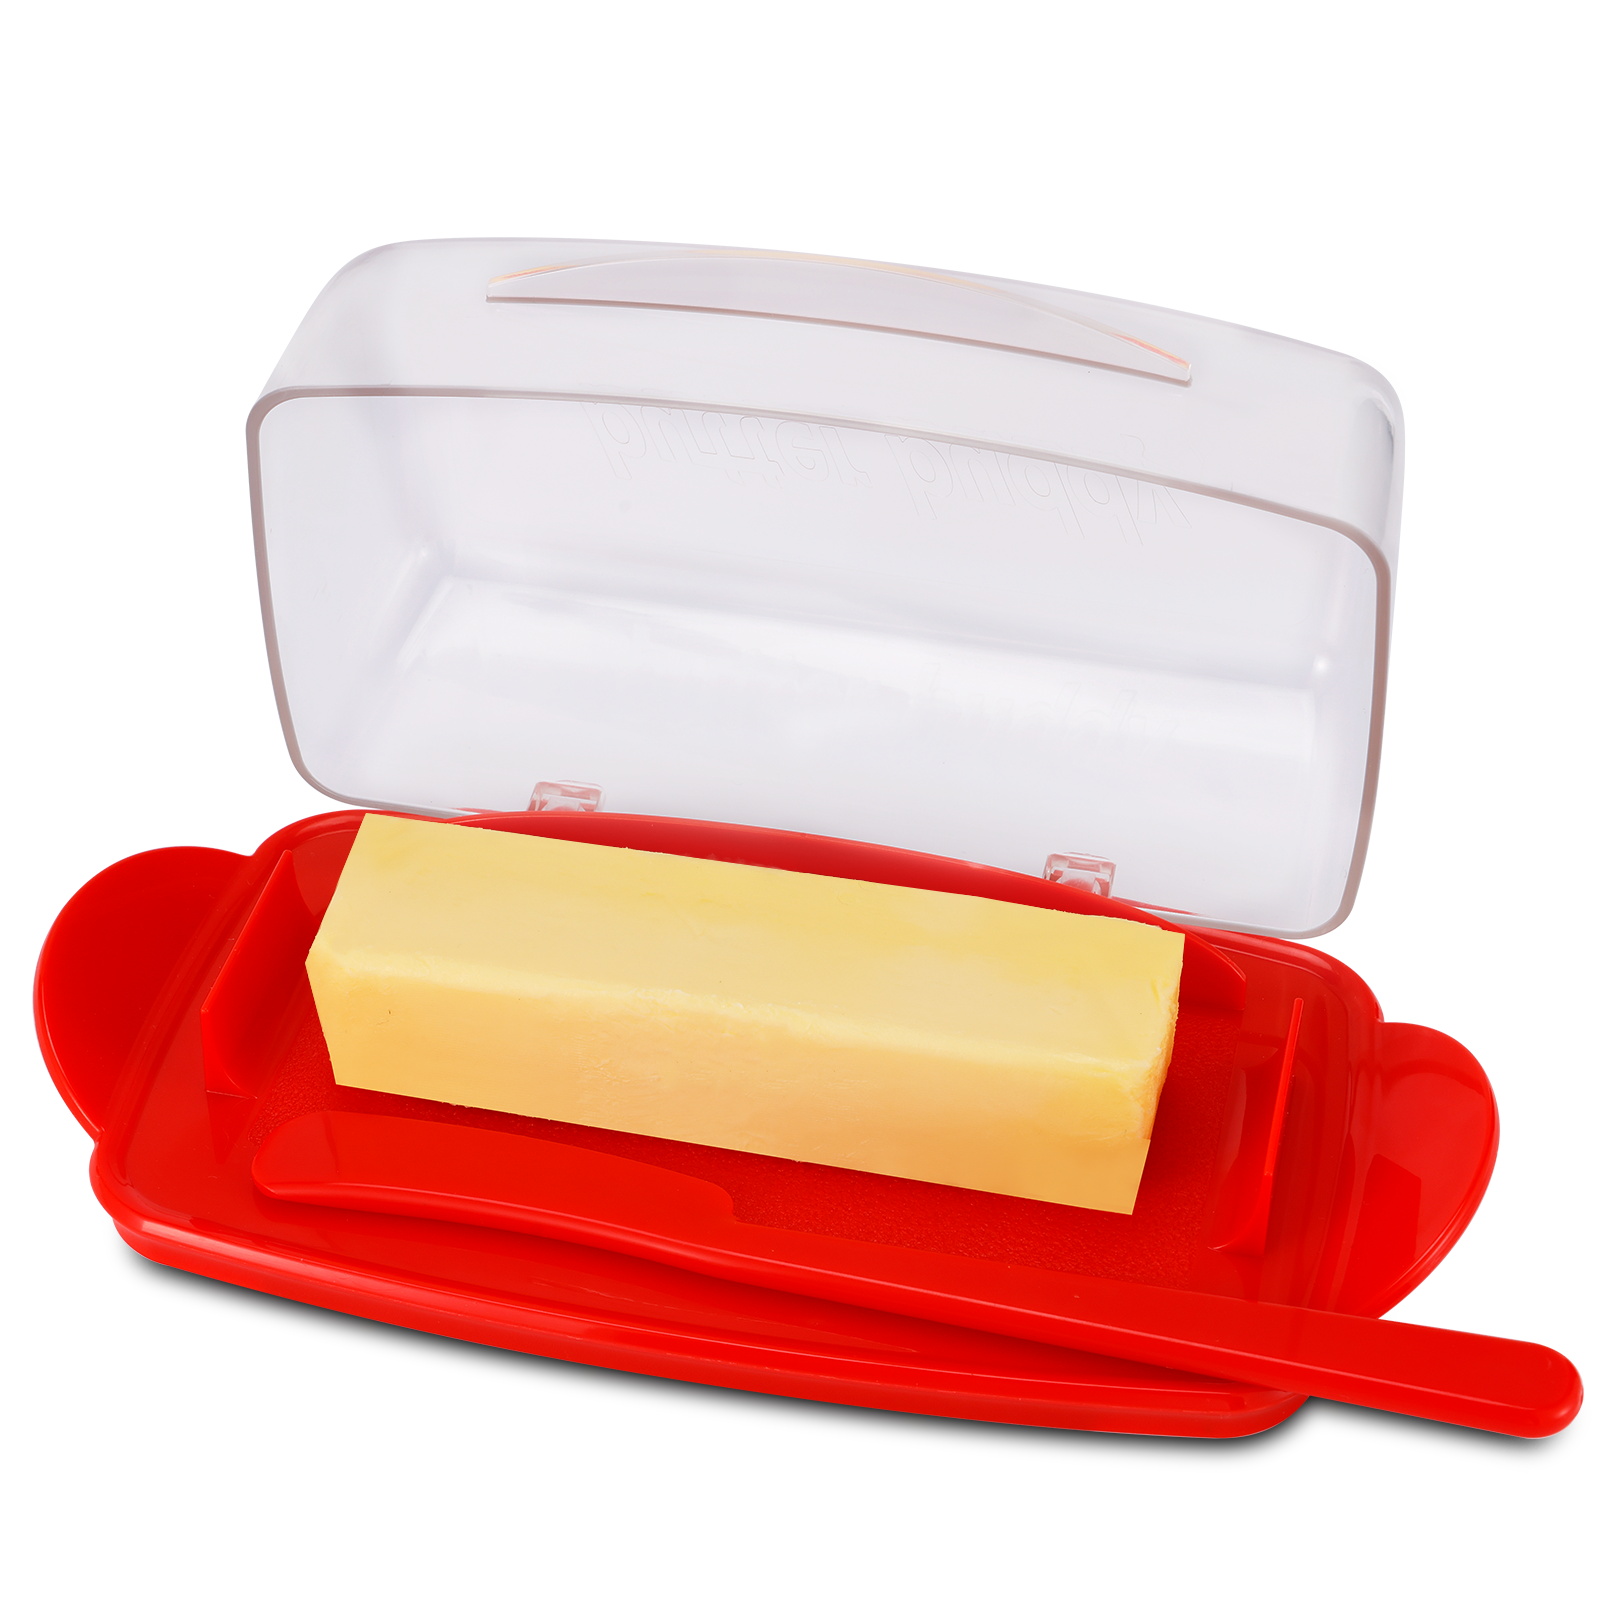 Butter Dish with Countertop Lid, Durable Plastic Butter Container with Spreader Knife, Cute Handle and Flip Lid Design for Easy Access, Non-Slip Bottom Red